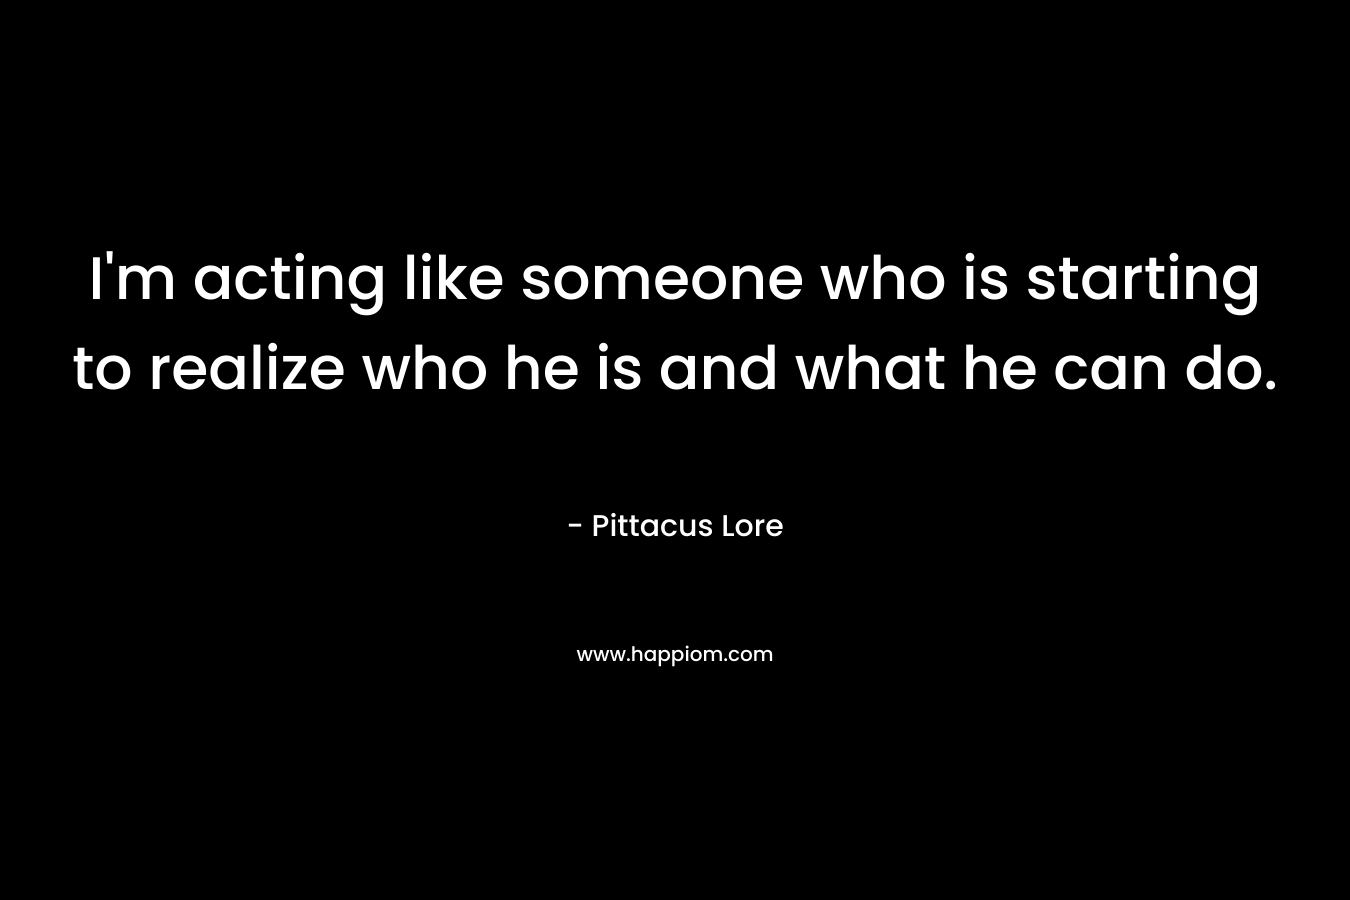 I’m acting like someone who is starting to realize who he is and what he can do. – Pittacus Lore